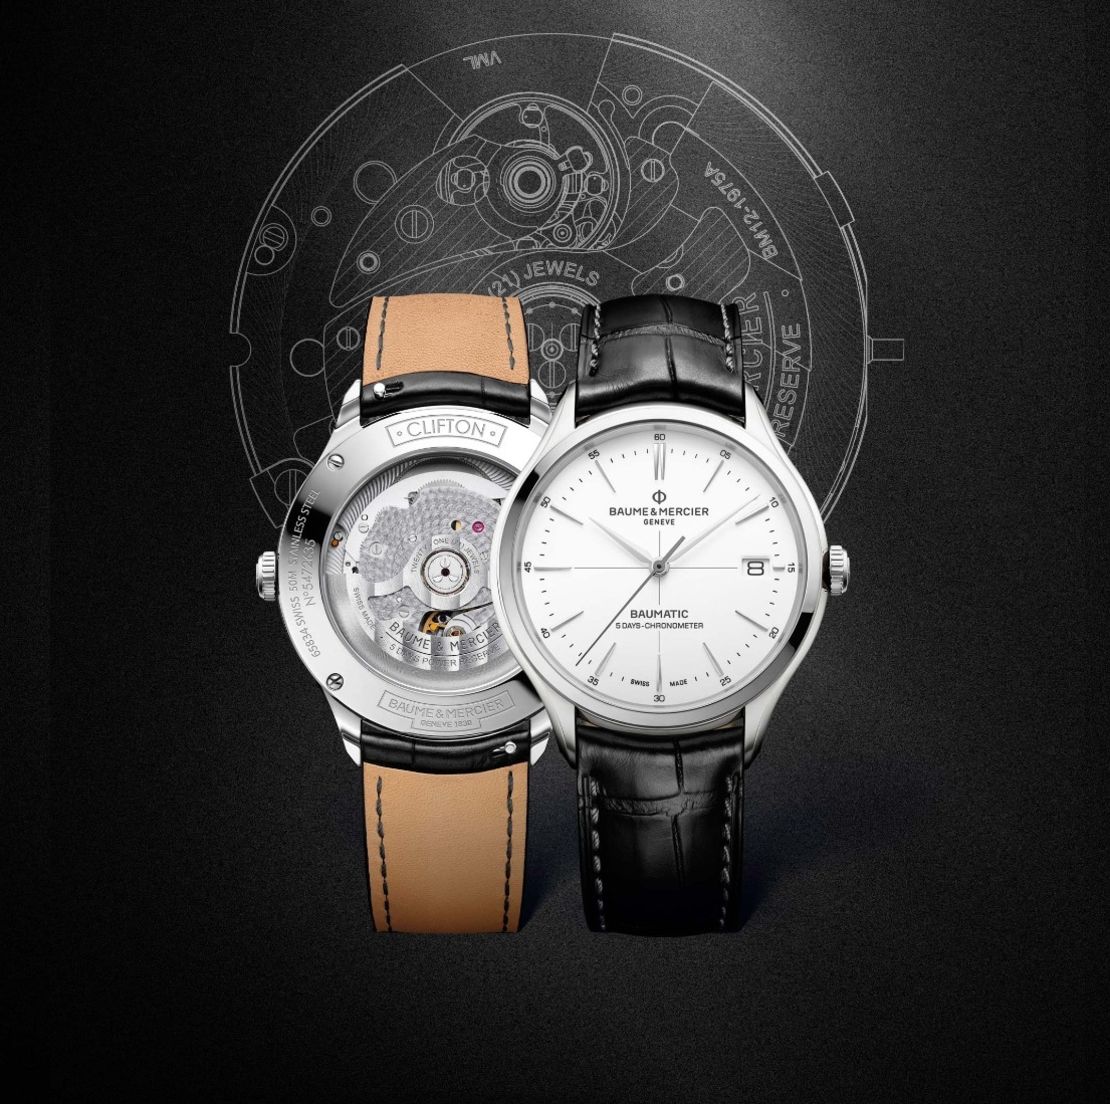 The Baume & Mercier Clifton Baumatic brings high-end watch features and classic styling for under $3,000. 